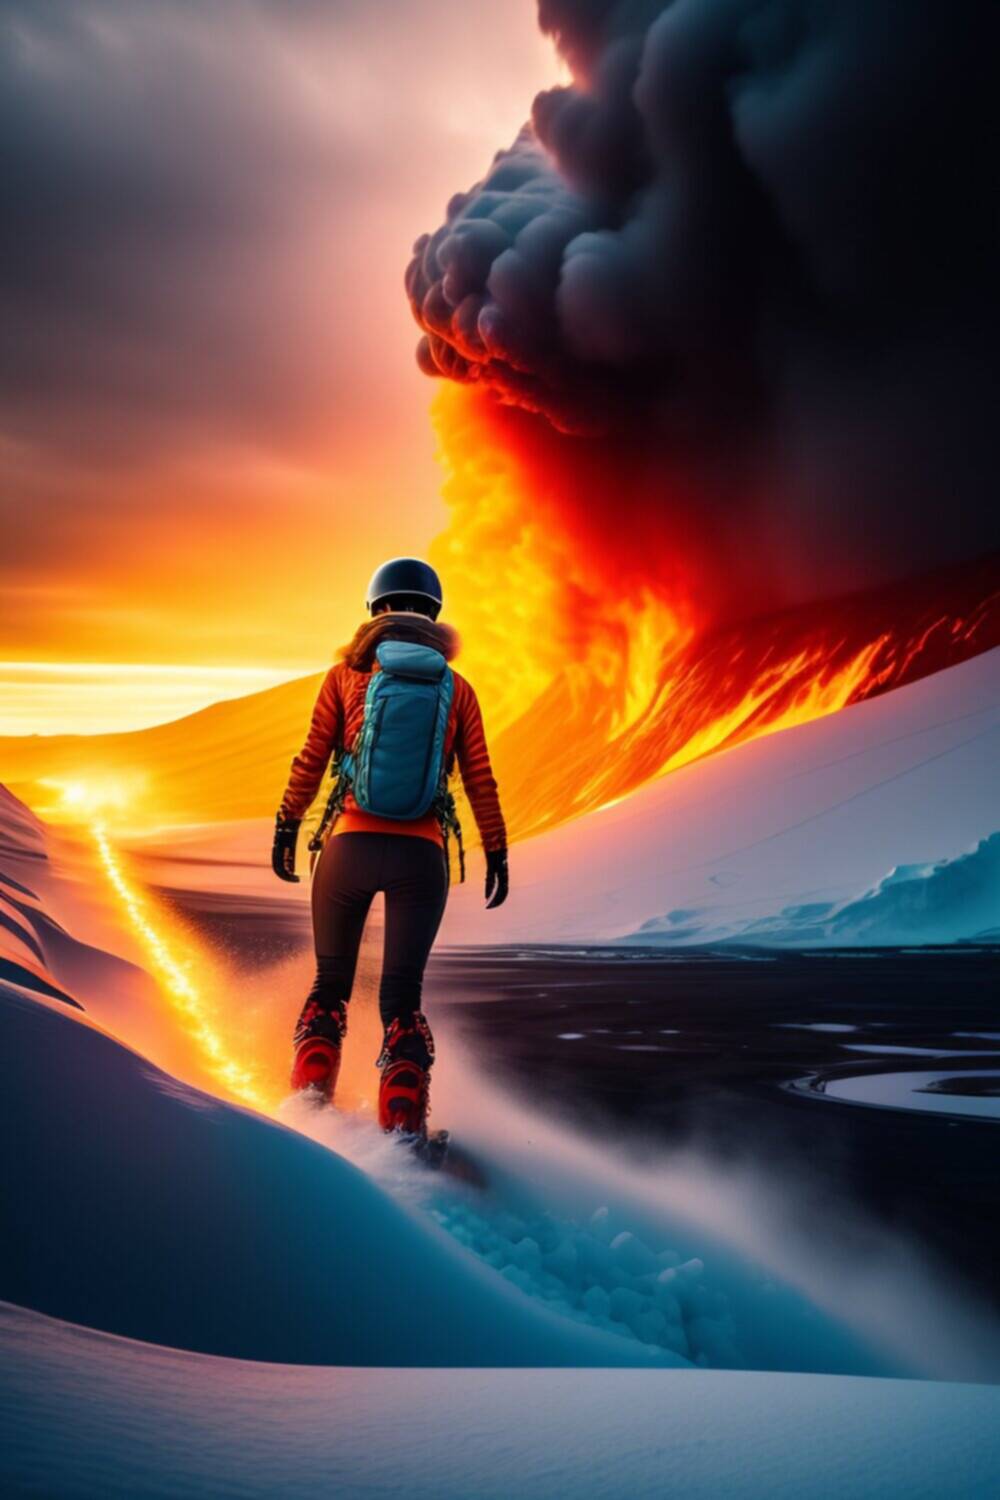 Roaming the Raw Power of Nature: A Journey Through the World's Most Exciting Volcanic Locations